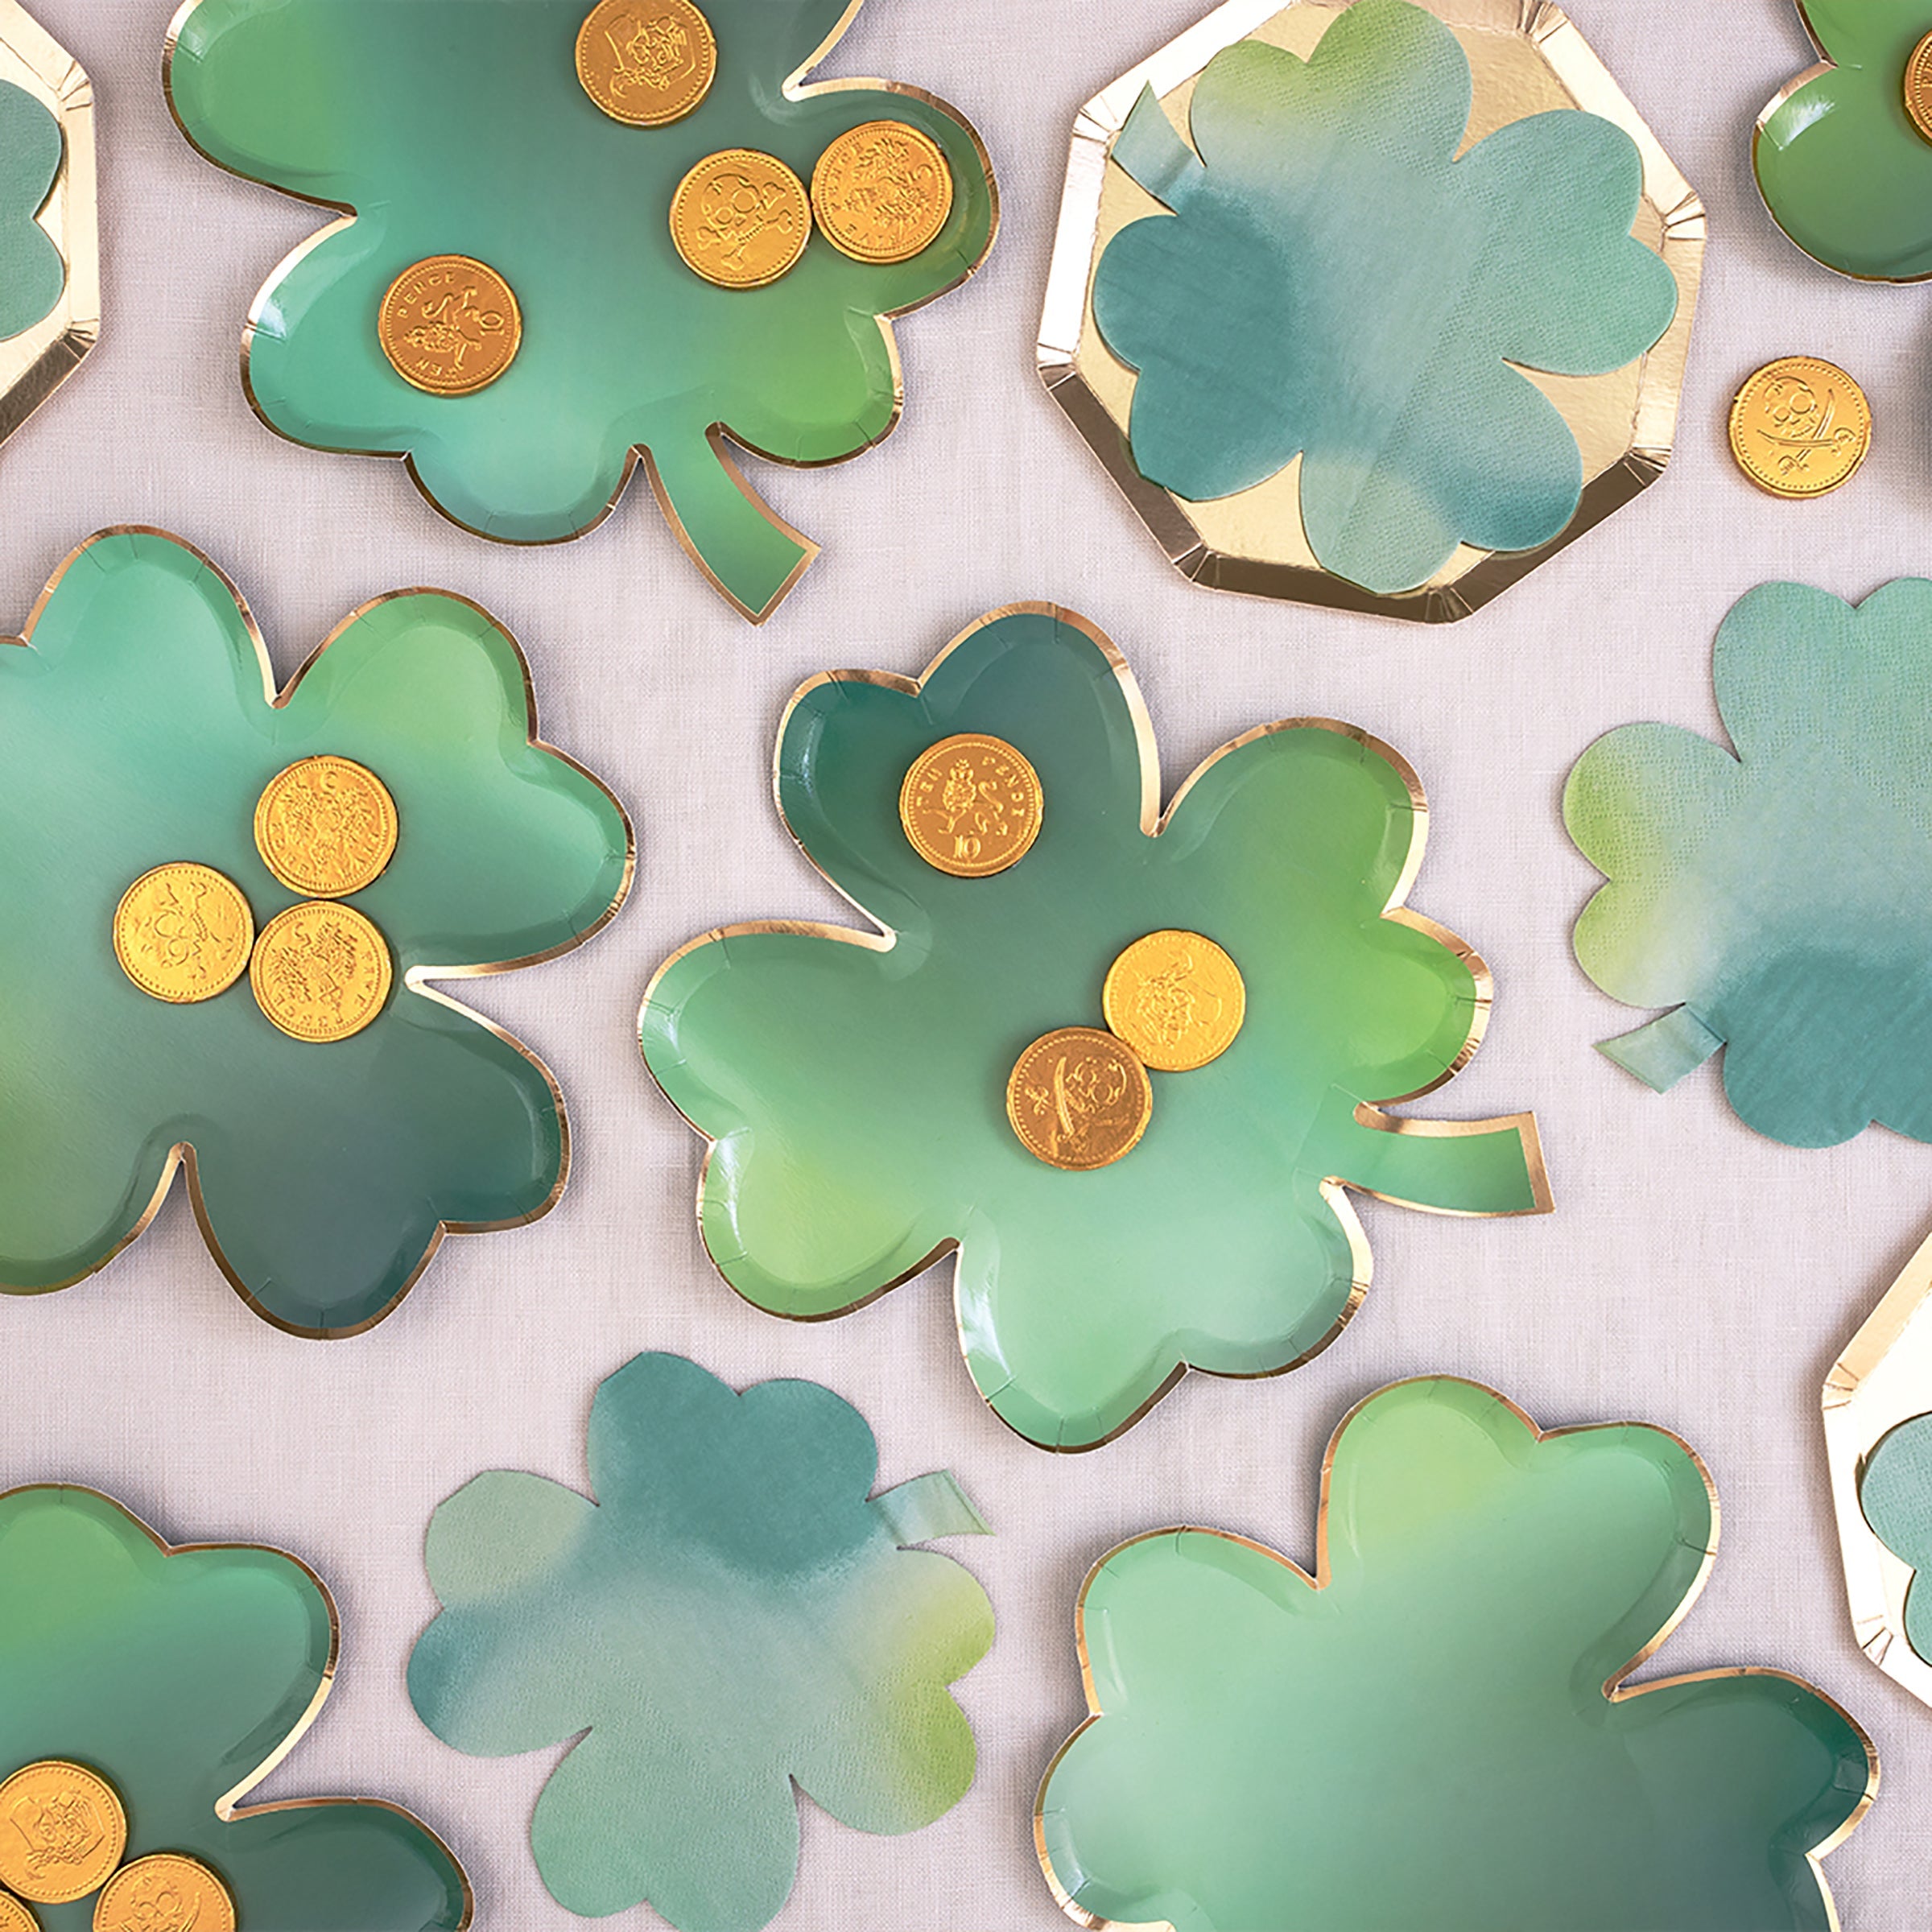 Our four leaf clover plates are perfect for a St Patricks Day celebration.